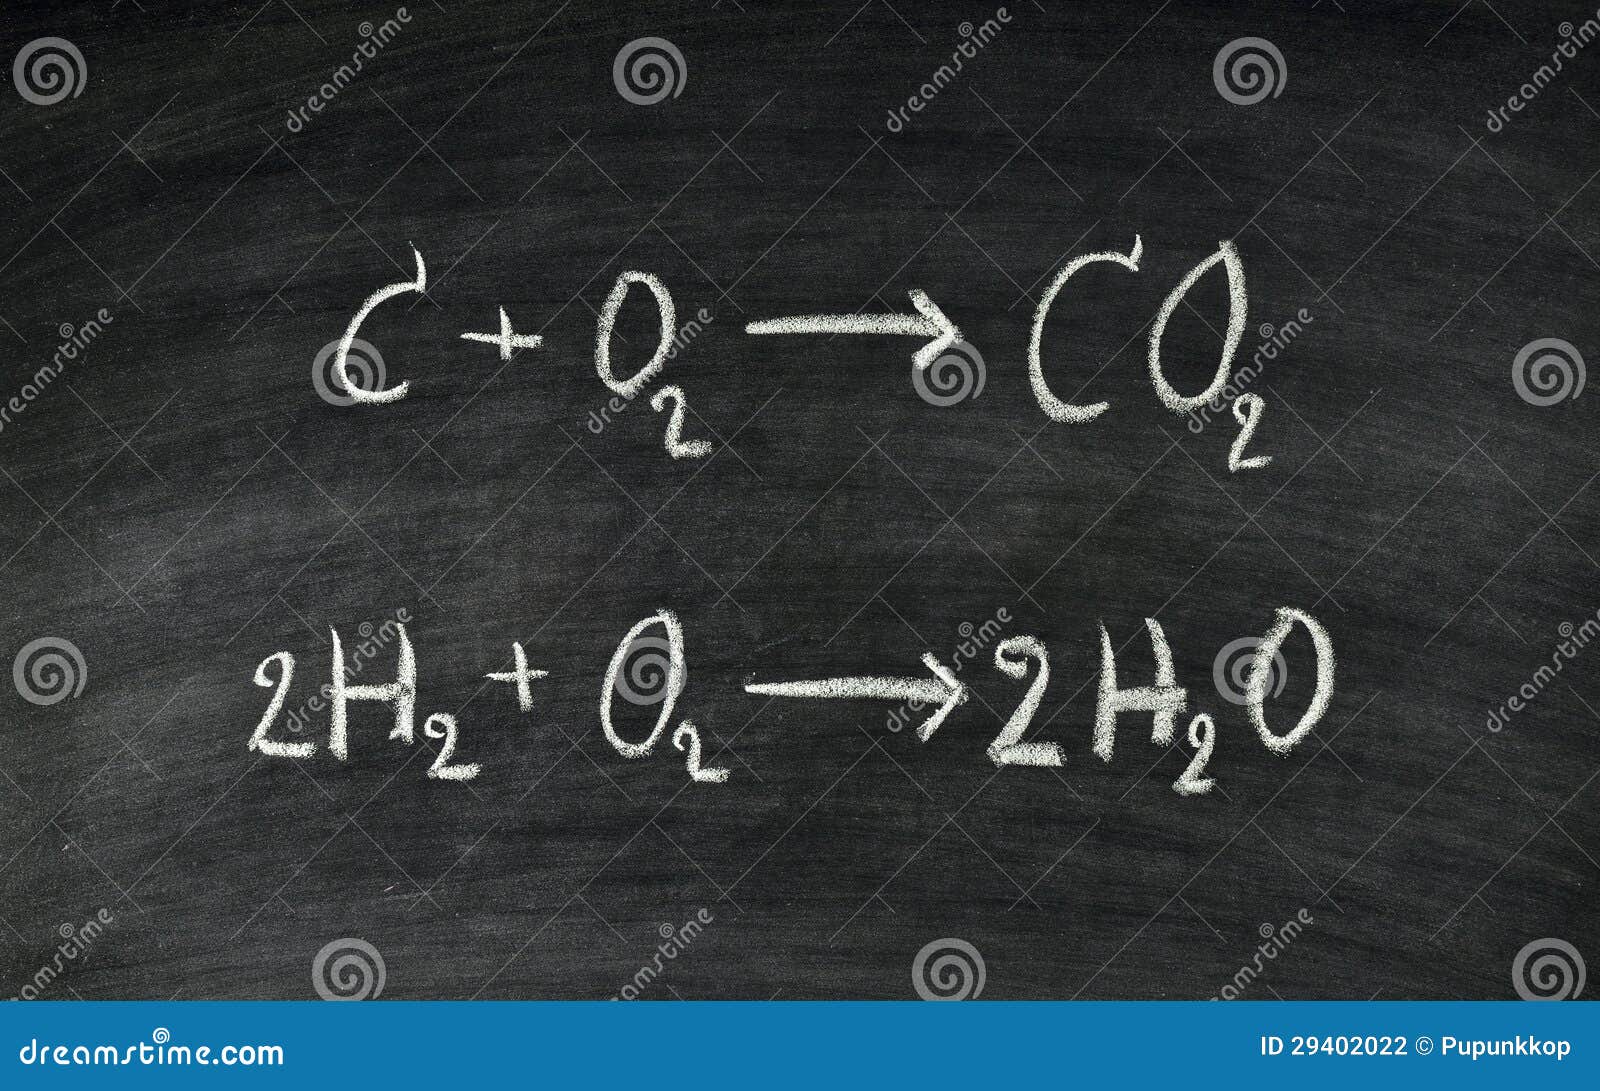 4+ Thousand Chemical Equation Royalty-Free Images, Stock Photos